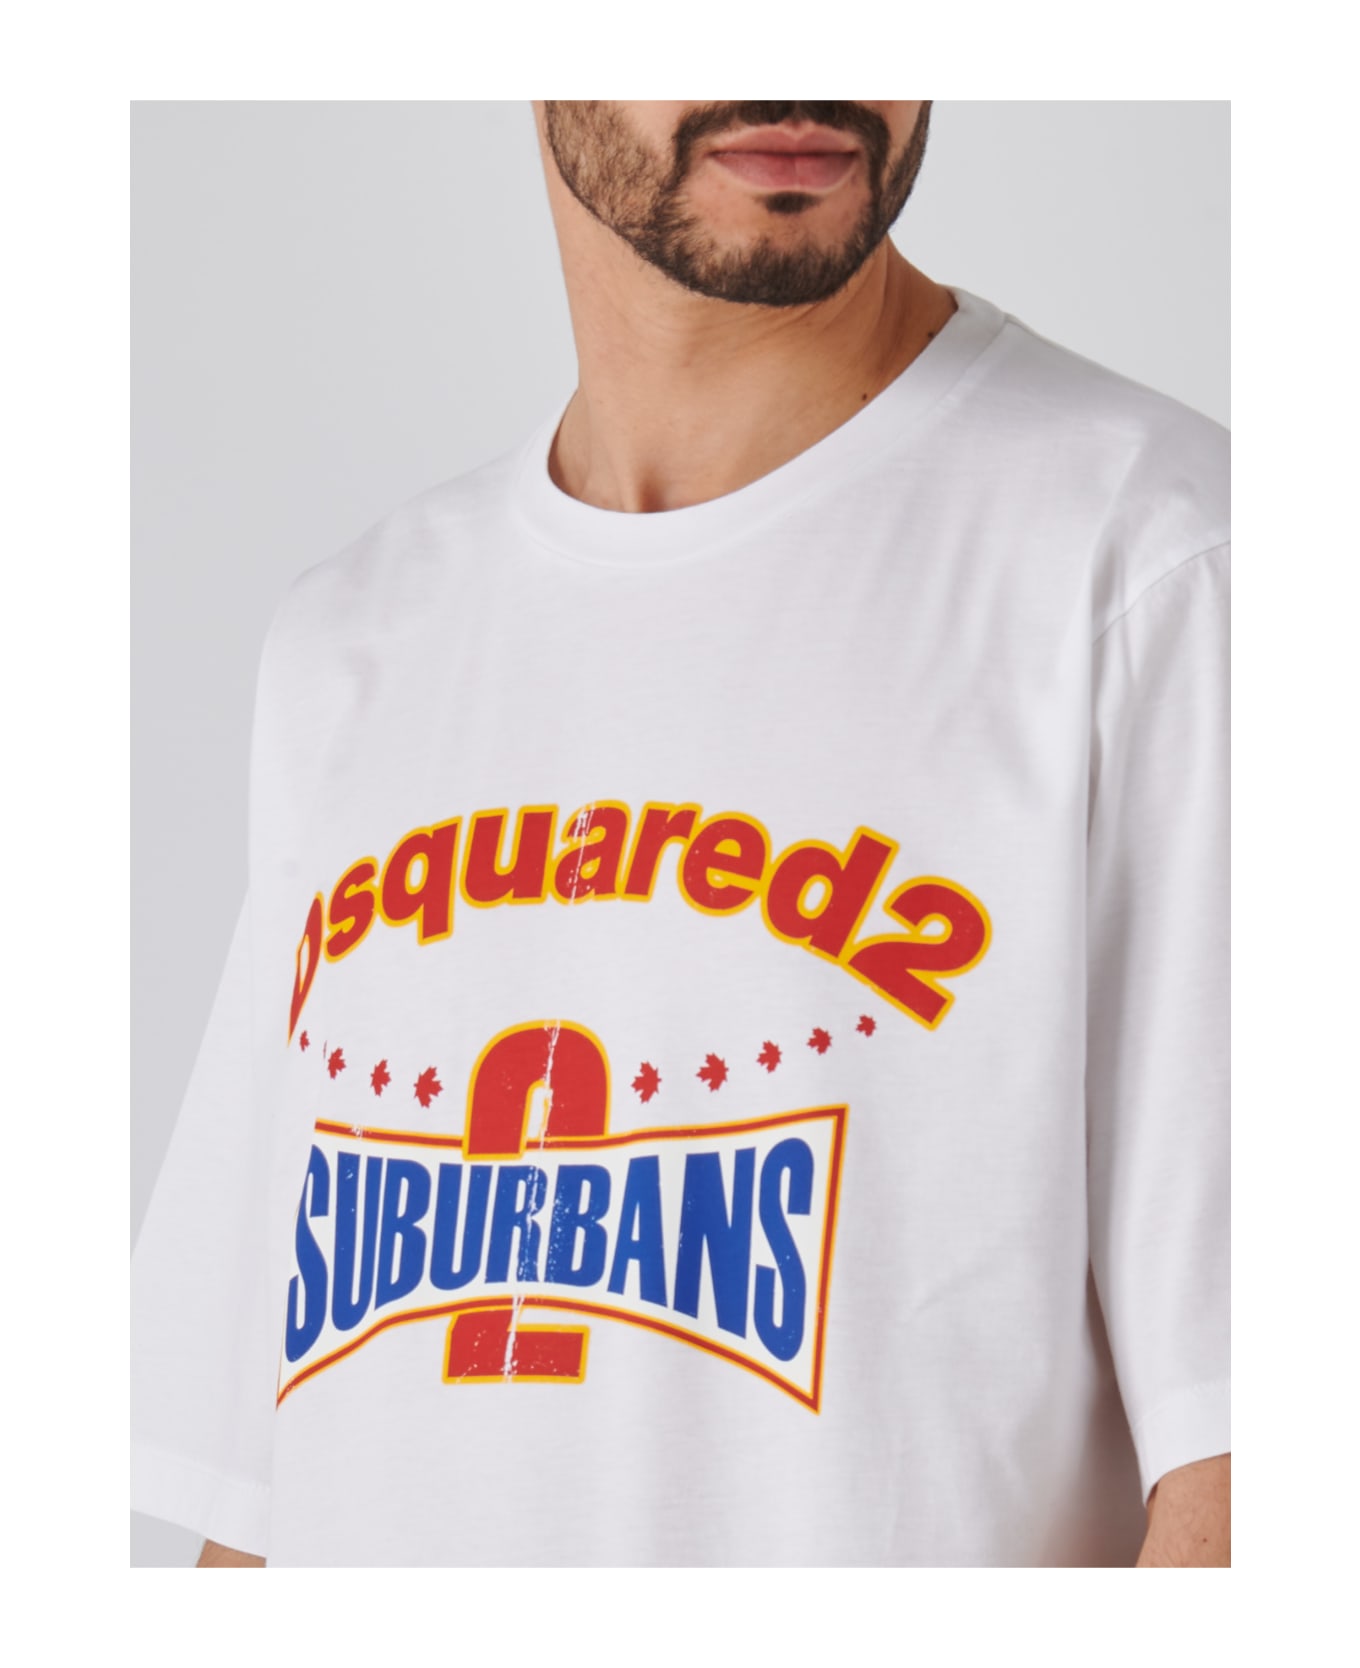 Dsquared2 Skater Fit Tee T-shirt - BIANCO